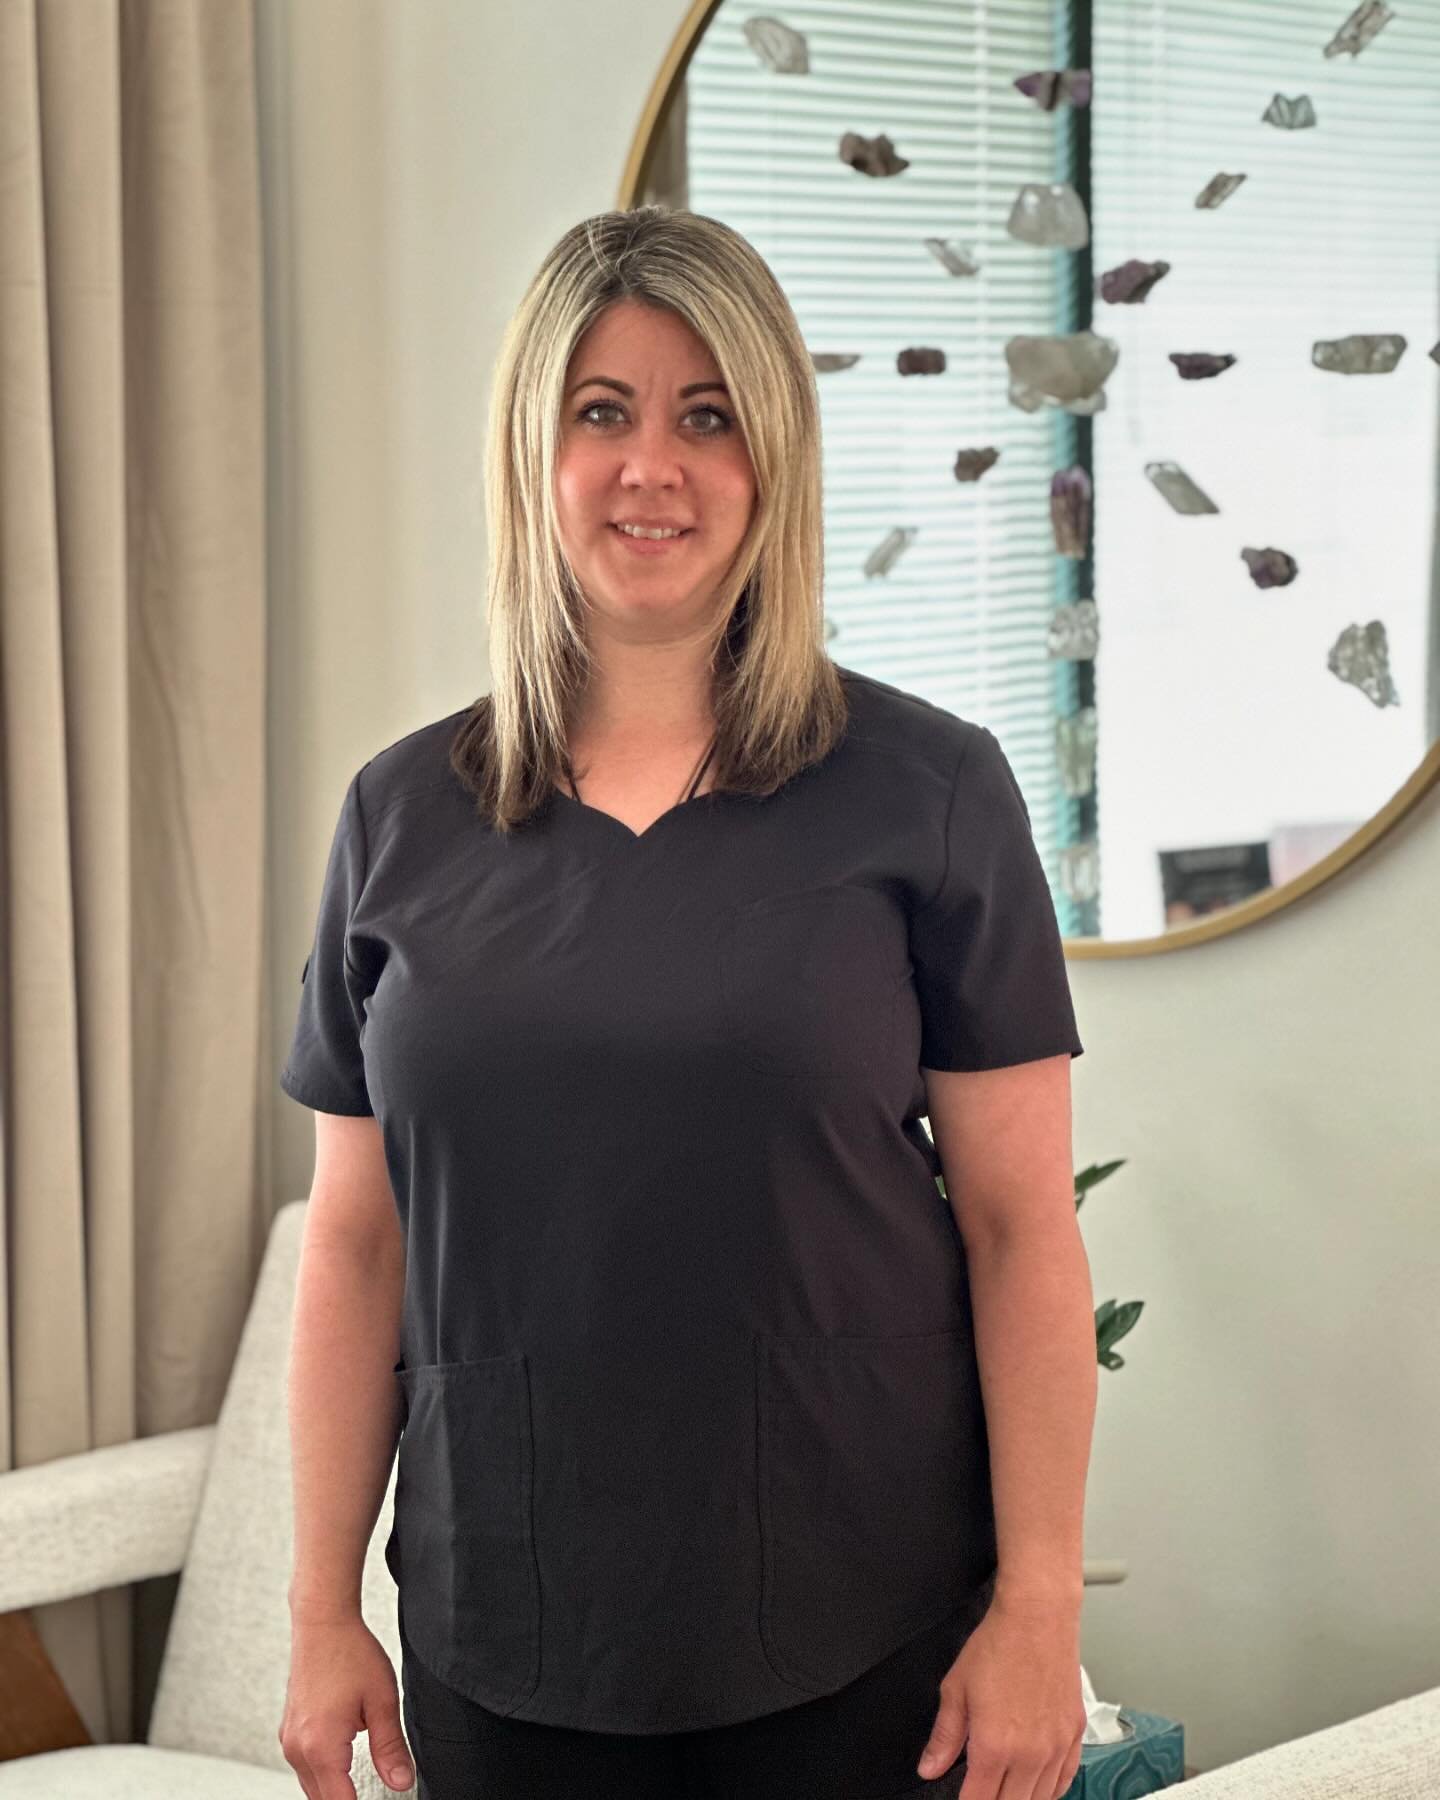 Meet our newest massage therapist Danielle! Danielle has been working in the chiropractic field for the last two years and has prior experience in spas. Danielle specializes in clinical bodywork and energy healing. Book your next massage with Daniell